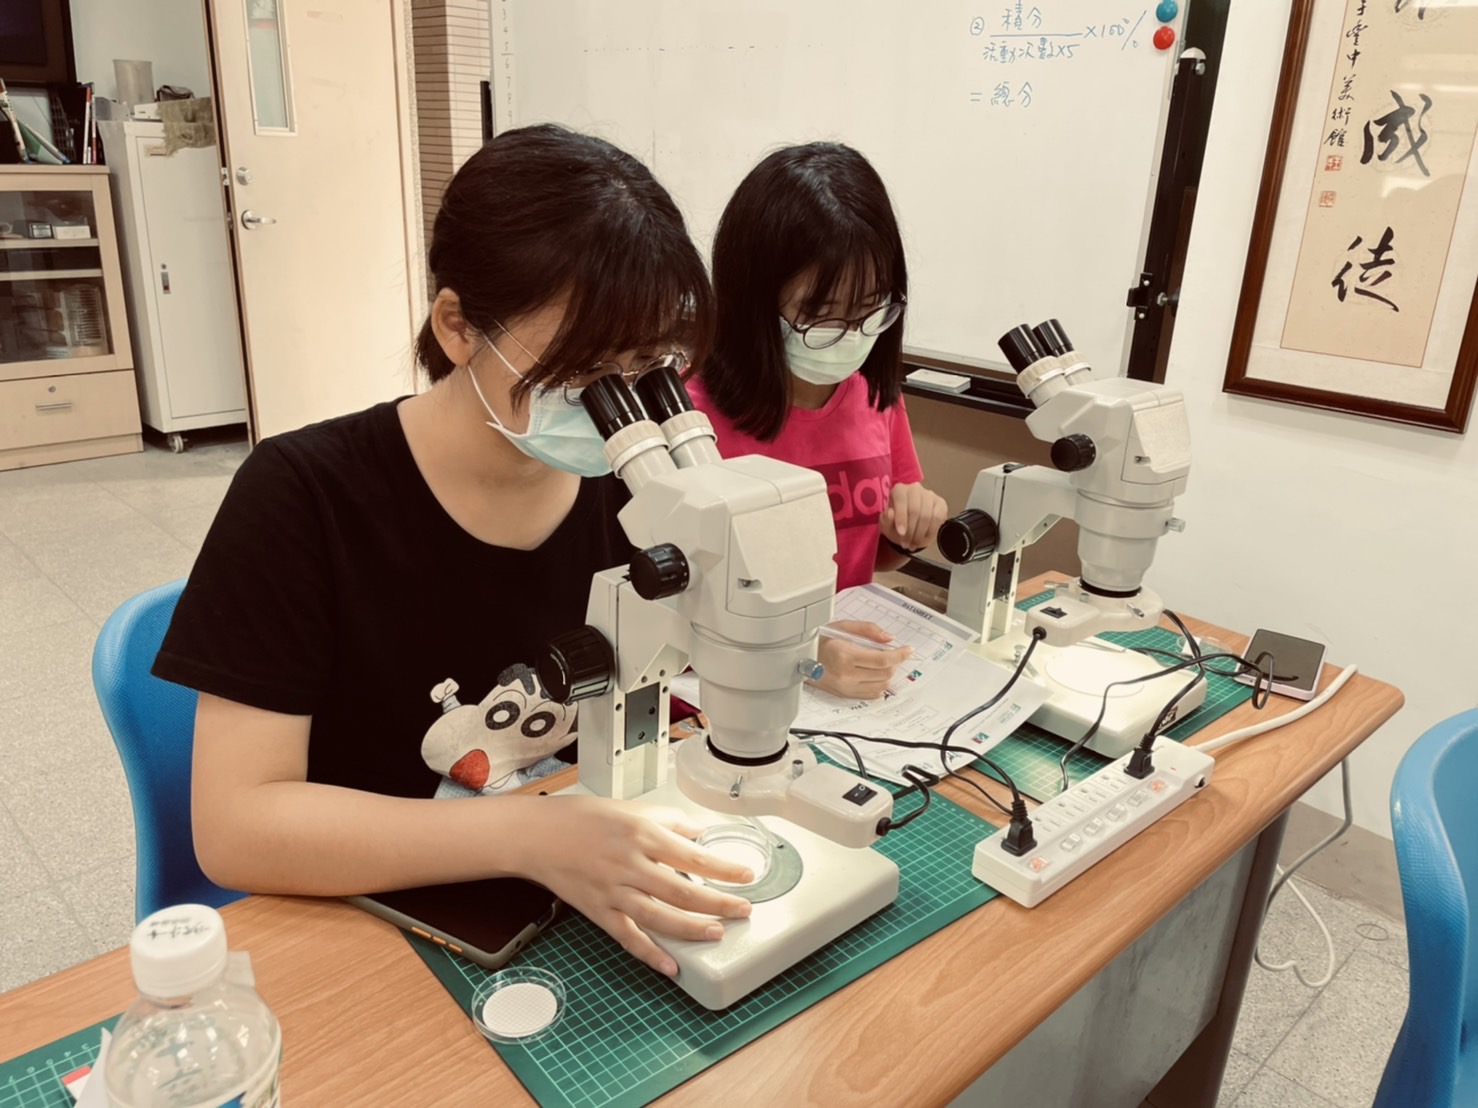 Students in Taiwan investigate the presence of microplastics in rivers